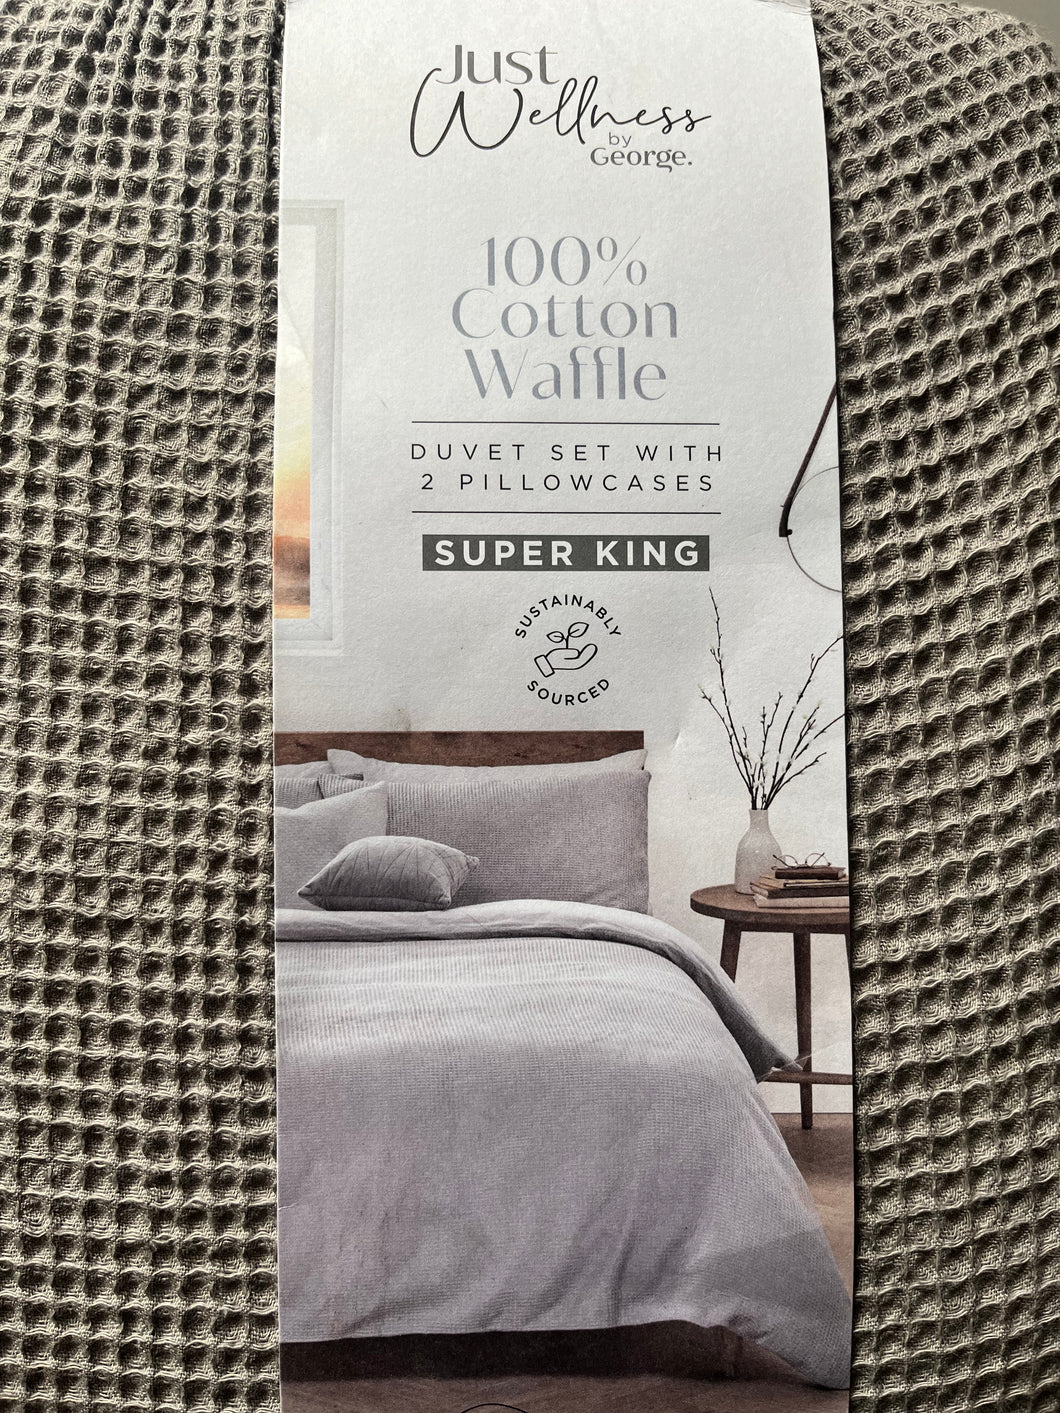 Just Wellness by george Super King Duvet with 2 PillowCases - 100% cotton waffle ( Grey/Beige Tone)